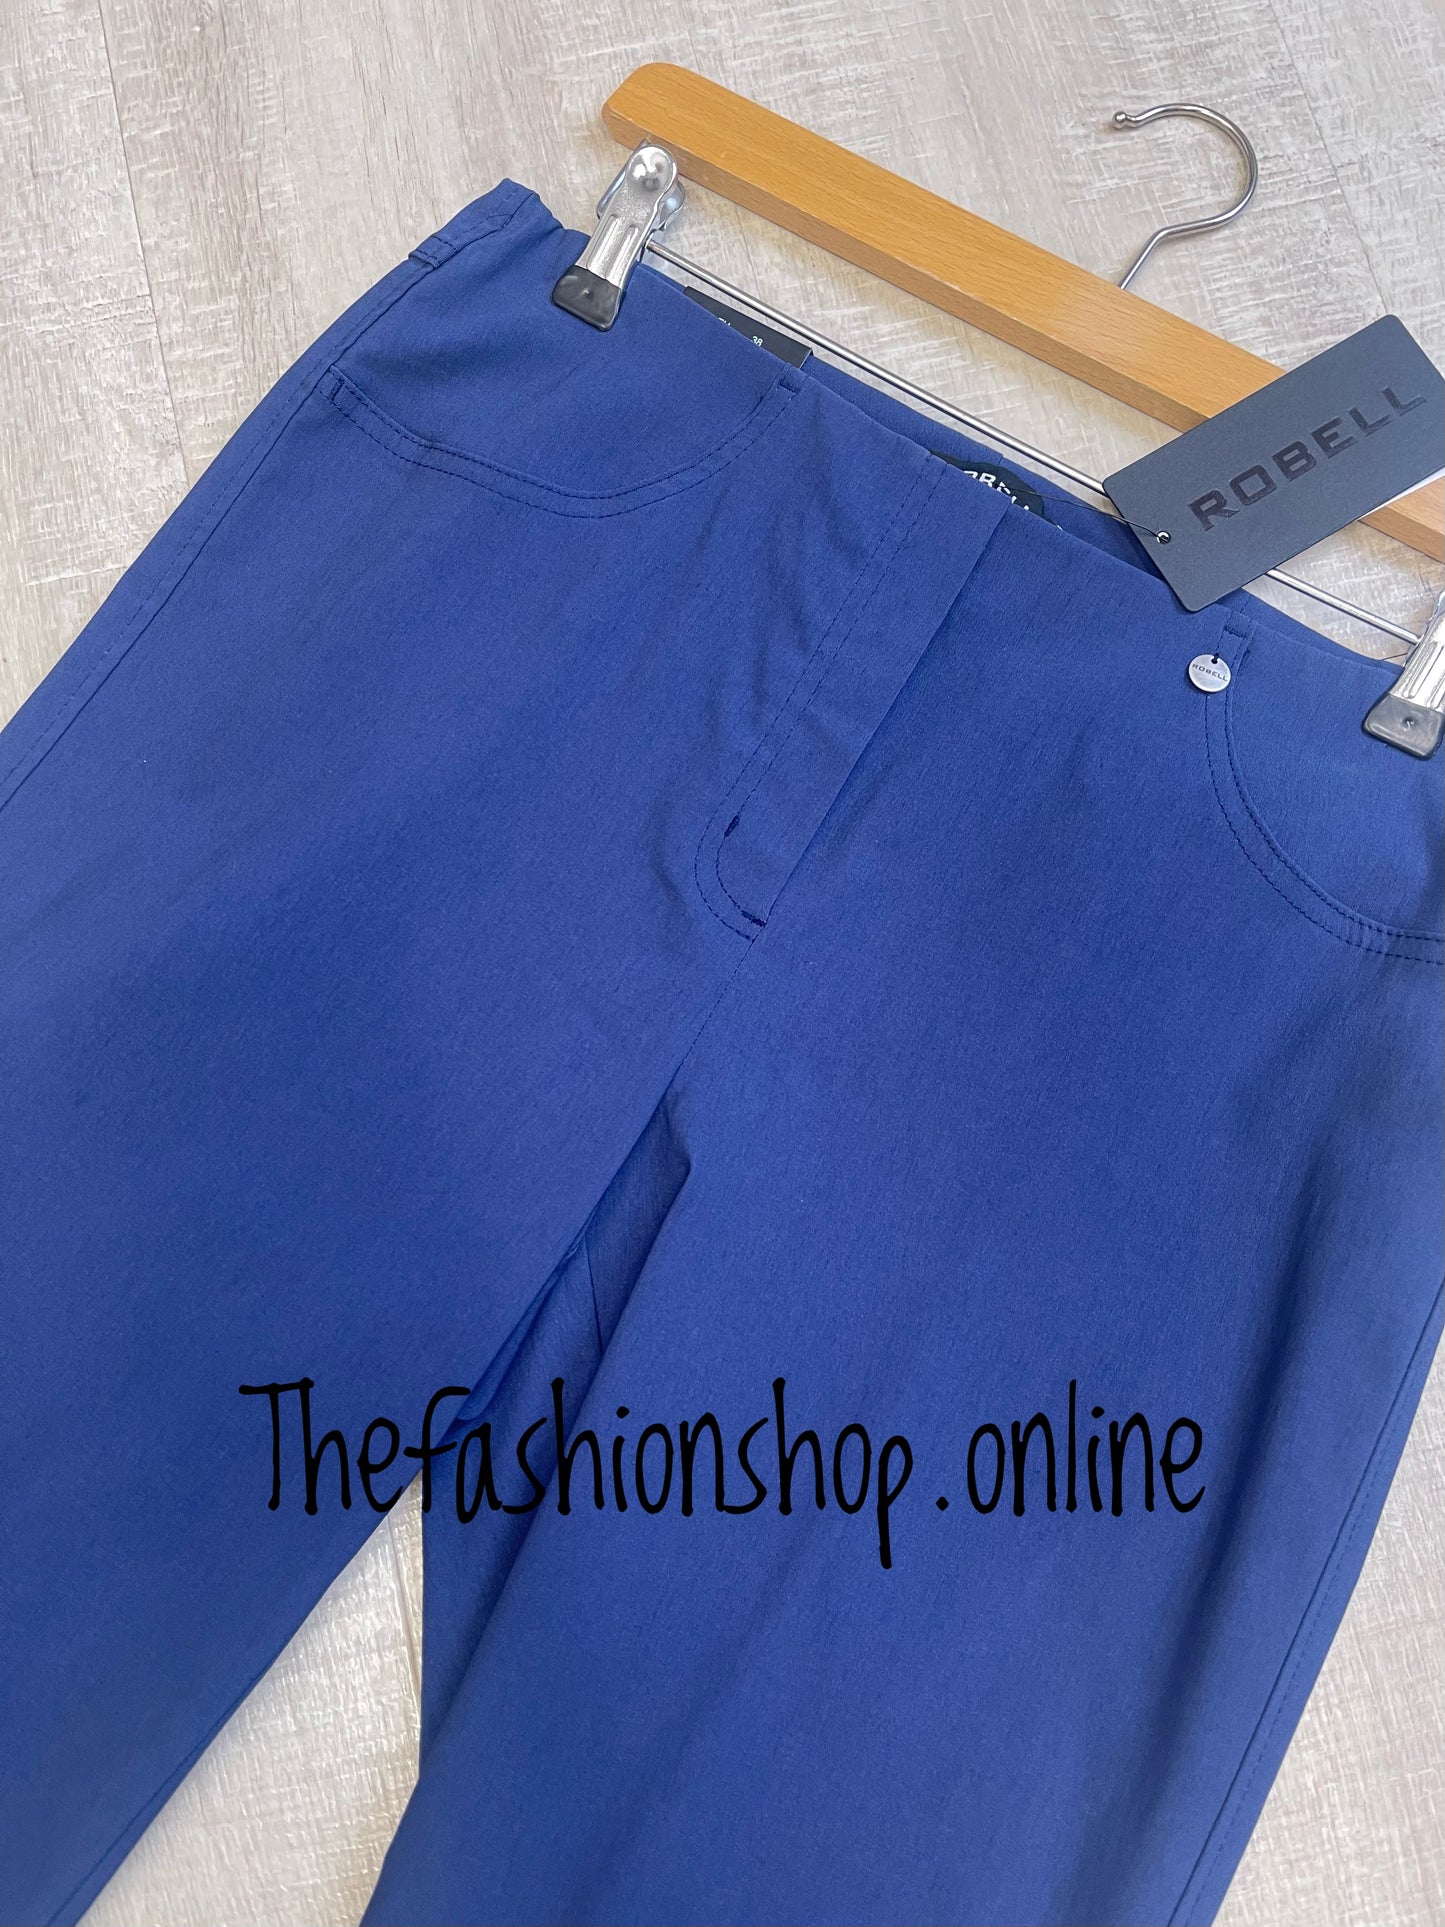 Robell Bella French blue trousers 27 inch inside leg sizes 12-24